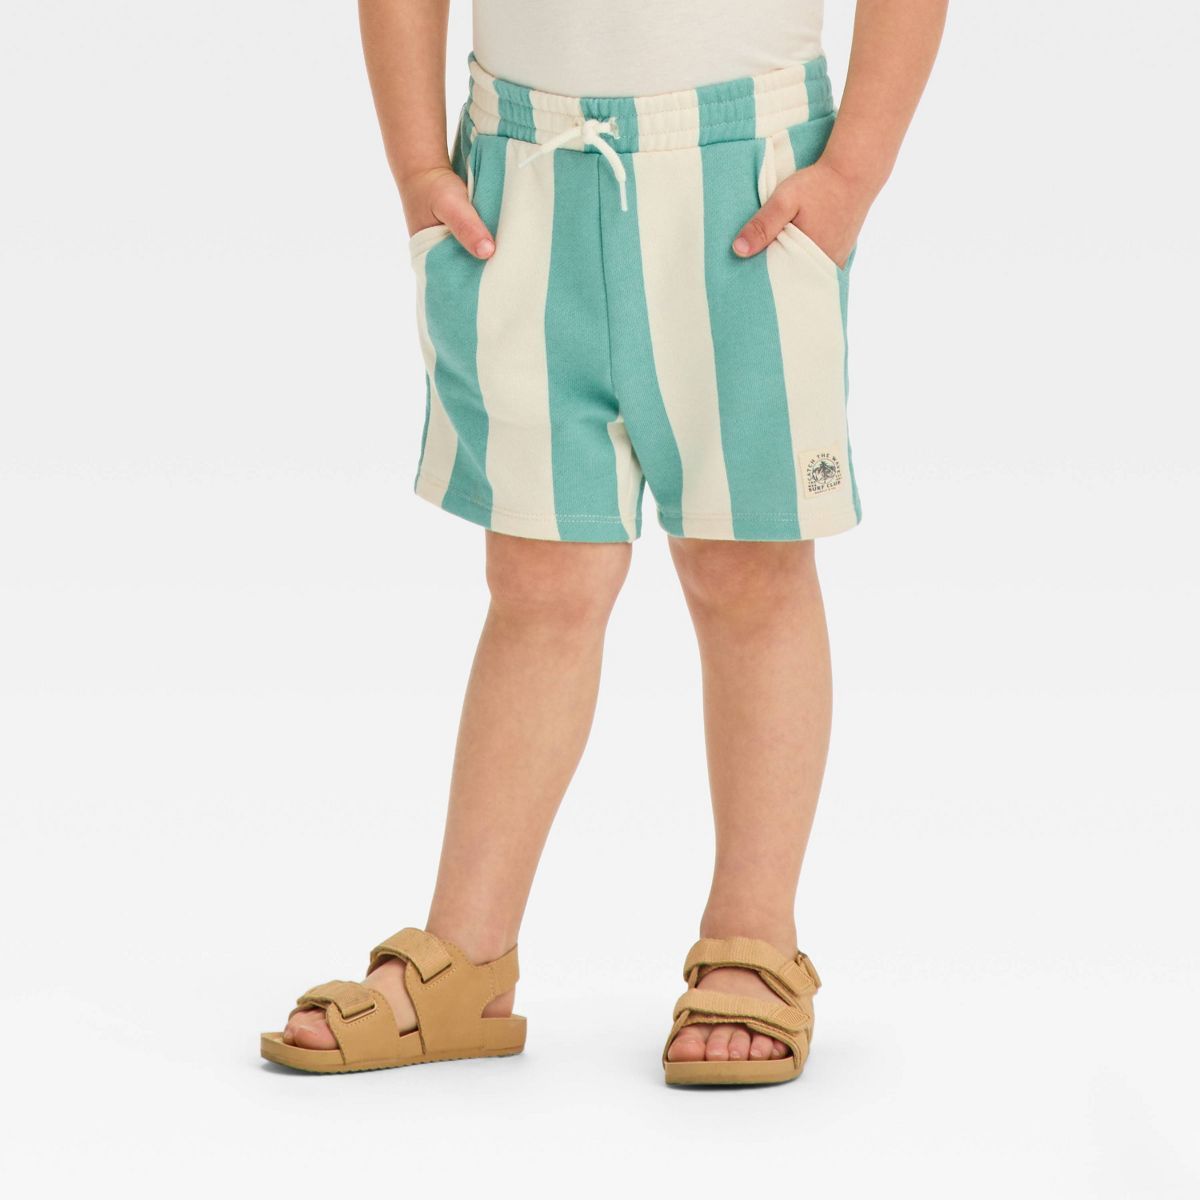 Grayson Mini Toddler Boys' Teal Striped Pull-On Cargo Shorts - Blue | Target